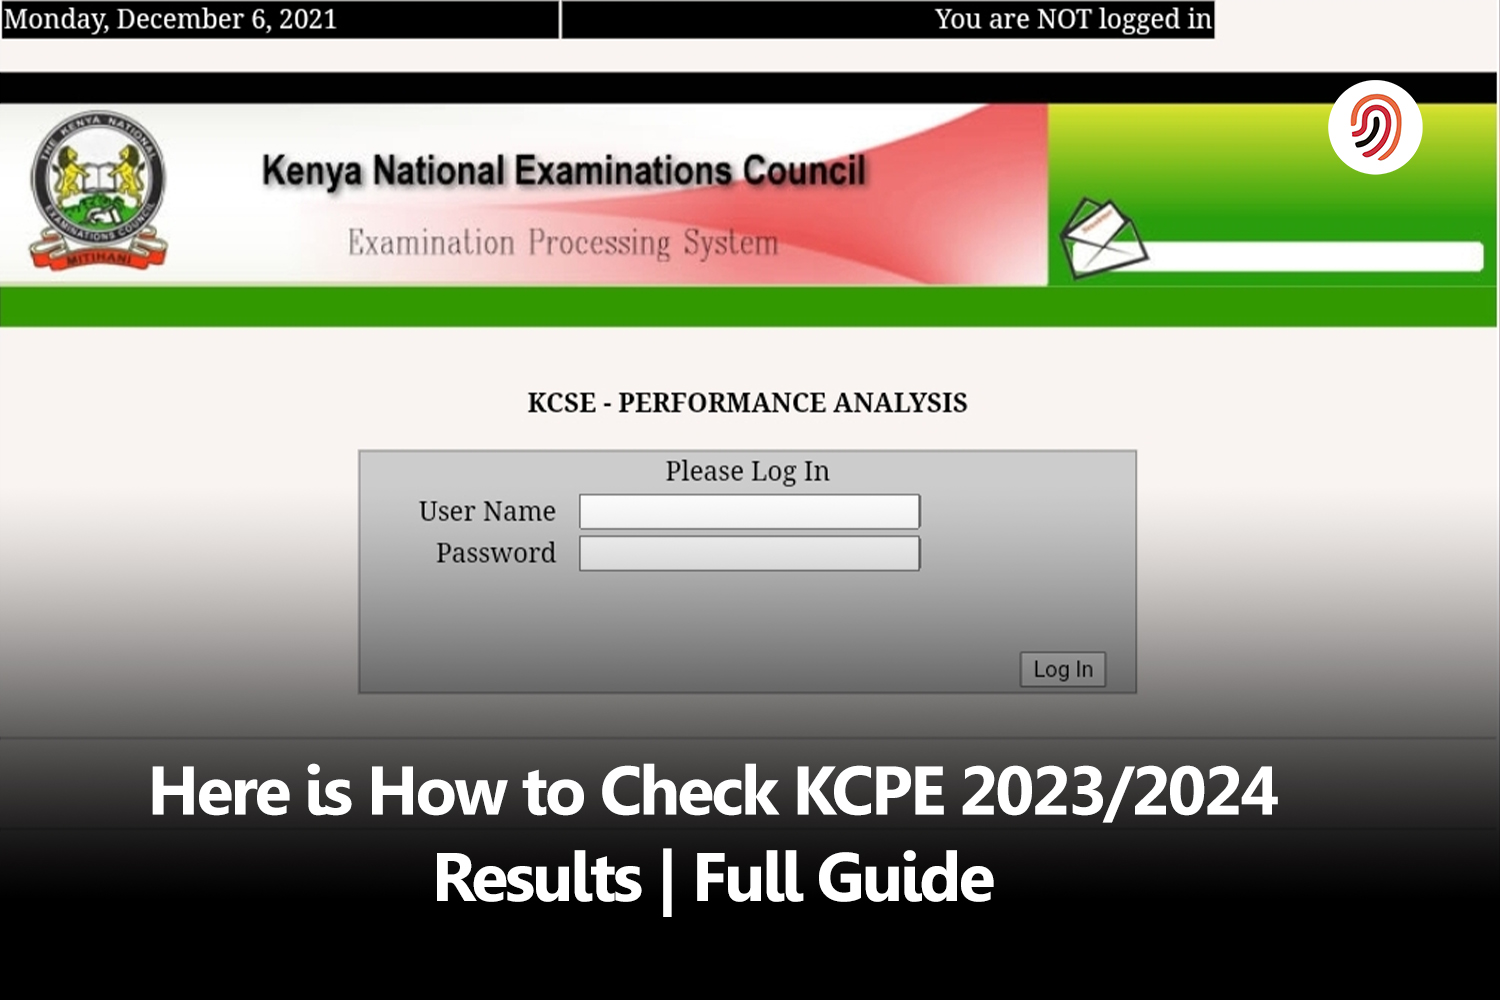 KCSE 2023/2024 results